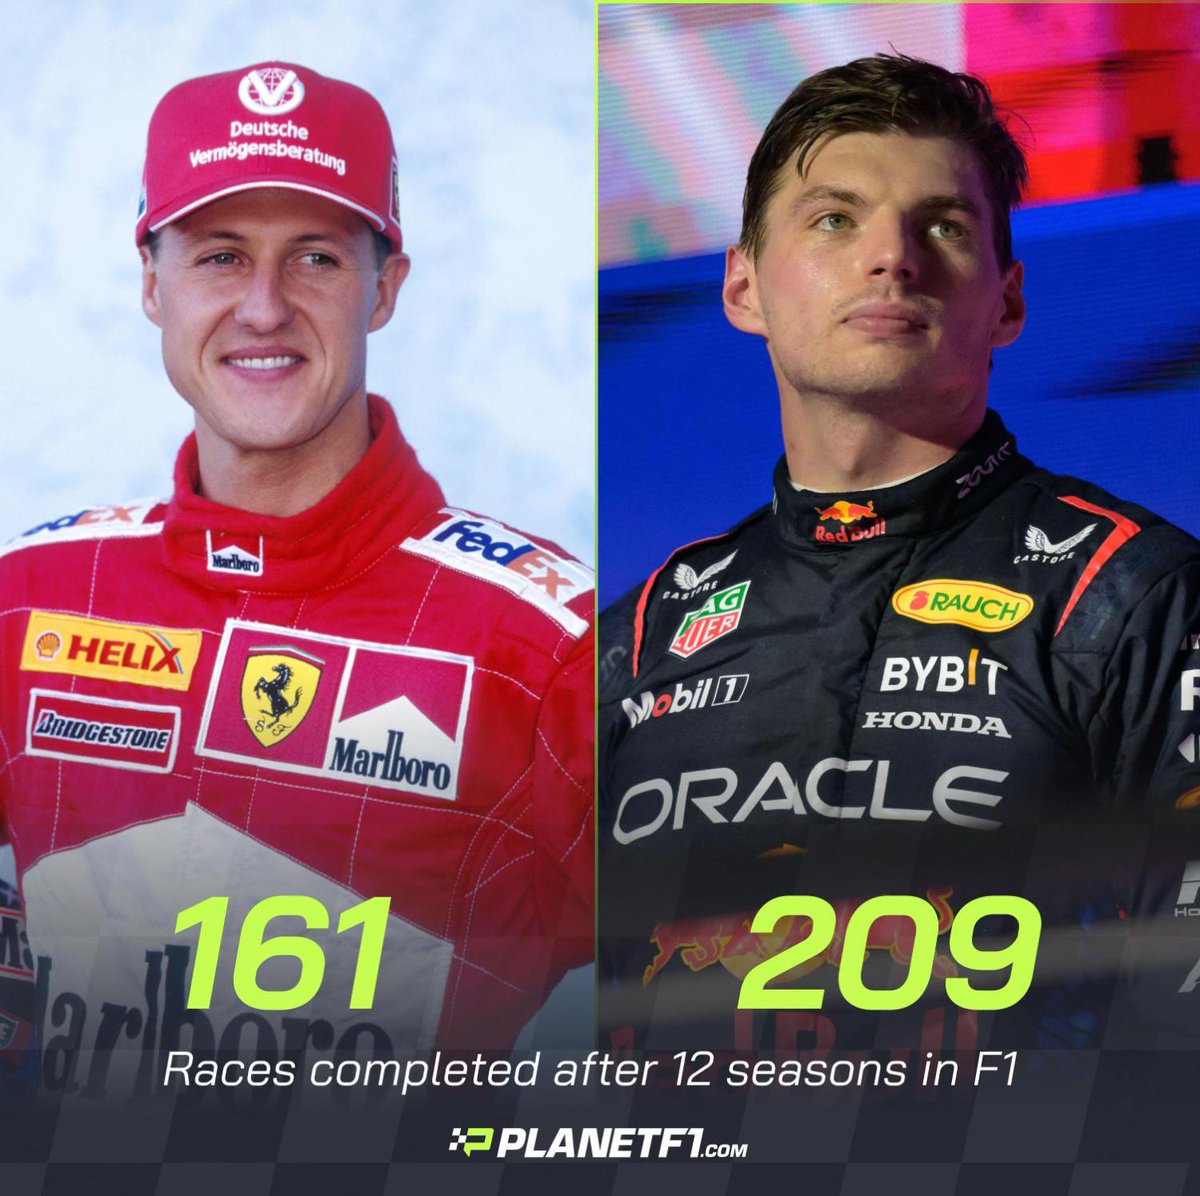 If Max Verstappen completes every race between now at the end of the #F1 2025 season, he will have raced 48 more times than Michael Schumacher did over the same number of season. #MaxVerstappen #MichaelSchumacher